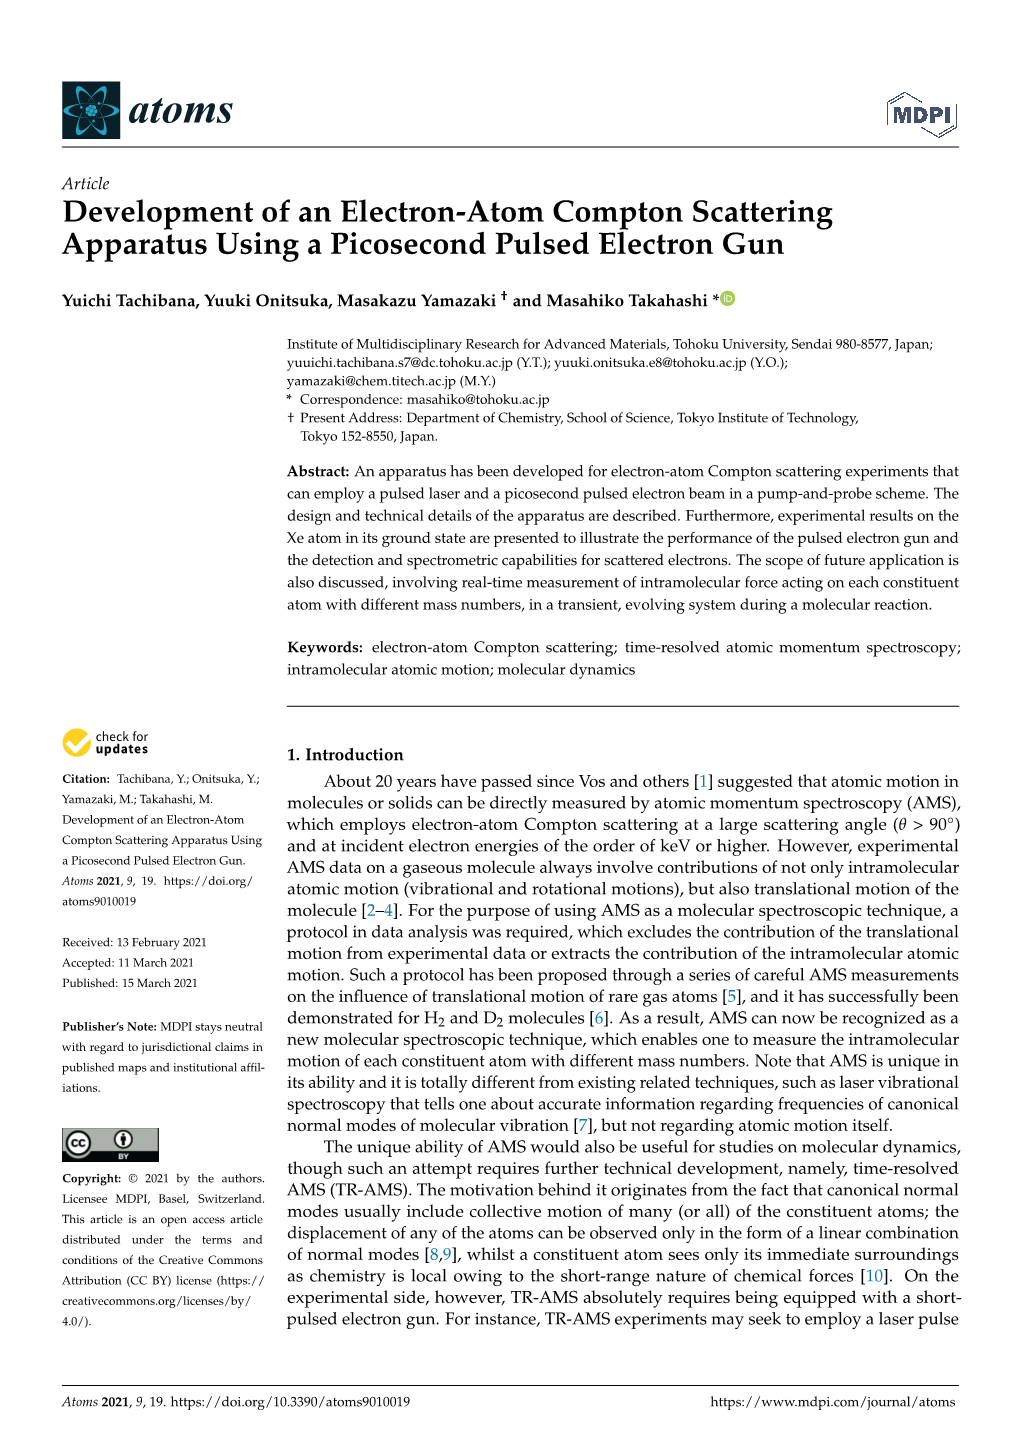 Development of an Electron-Atom Compton Scattering Apparatus Using a Picosecond Pulsed Electron Gun